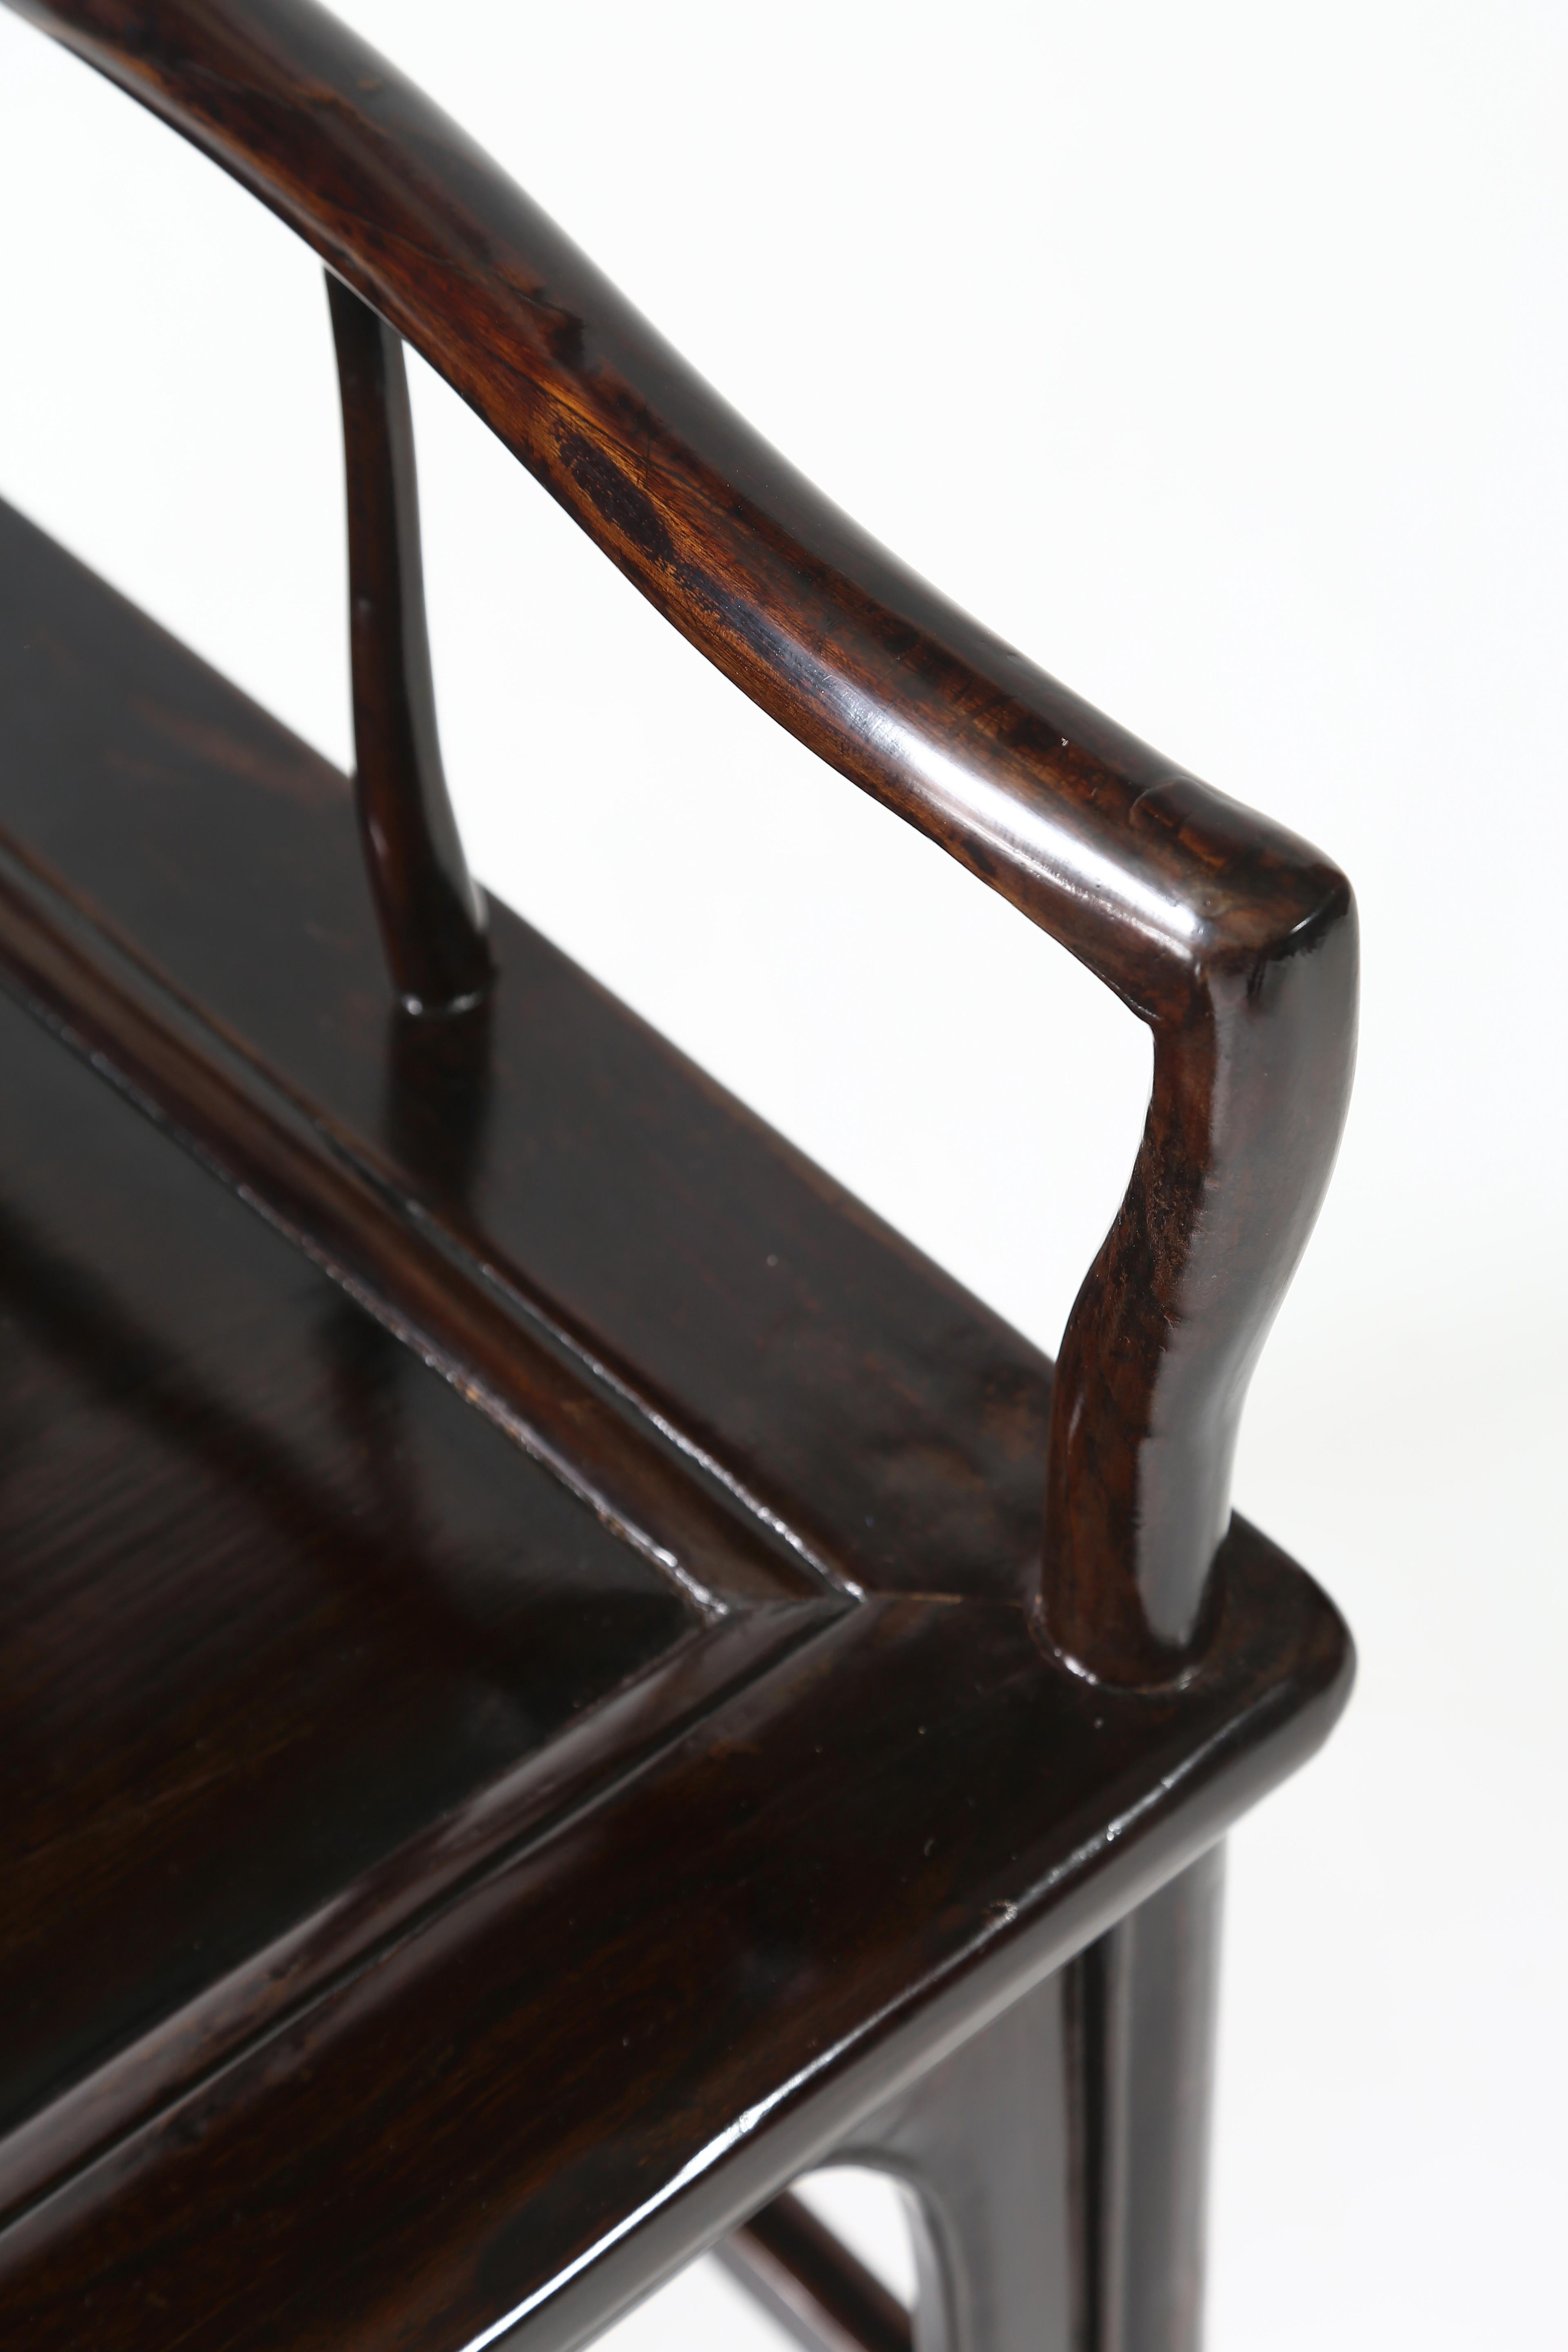 Pair of southern official’s hat armchairs.

The humpback crest rail supported by the back posts curving slightly backward at the top and extending to form the back legs, the back splat in S-curve with relief-carved knotted key scrolls motif,